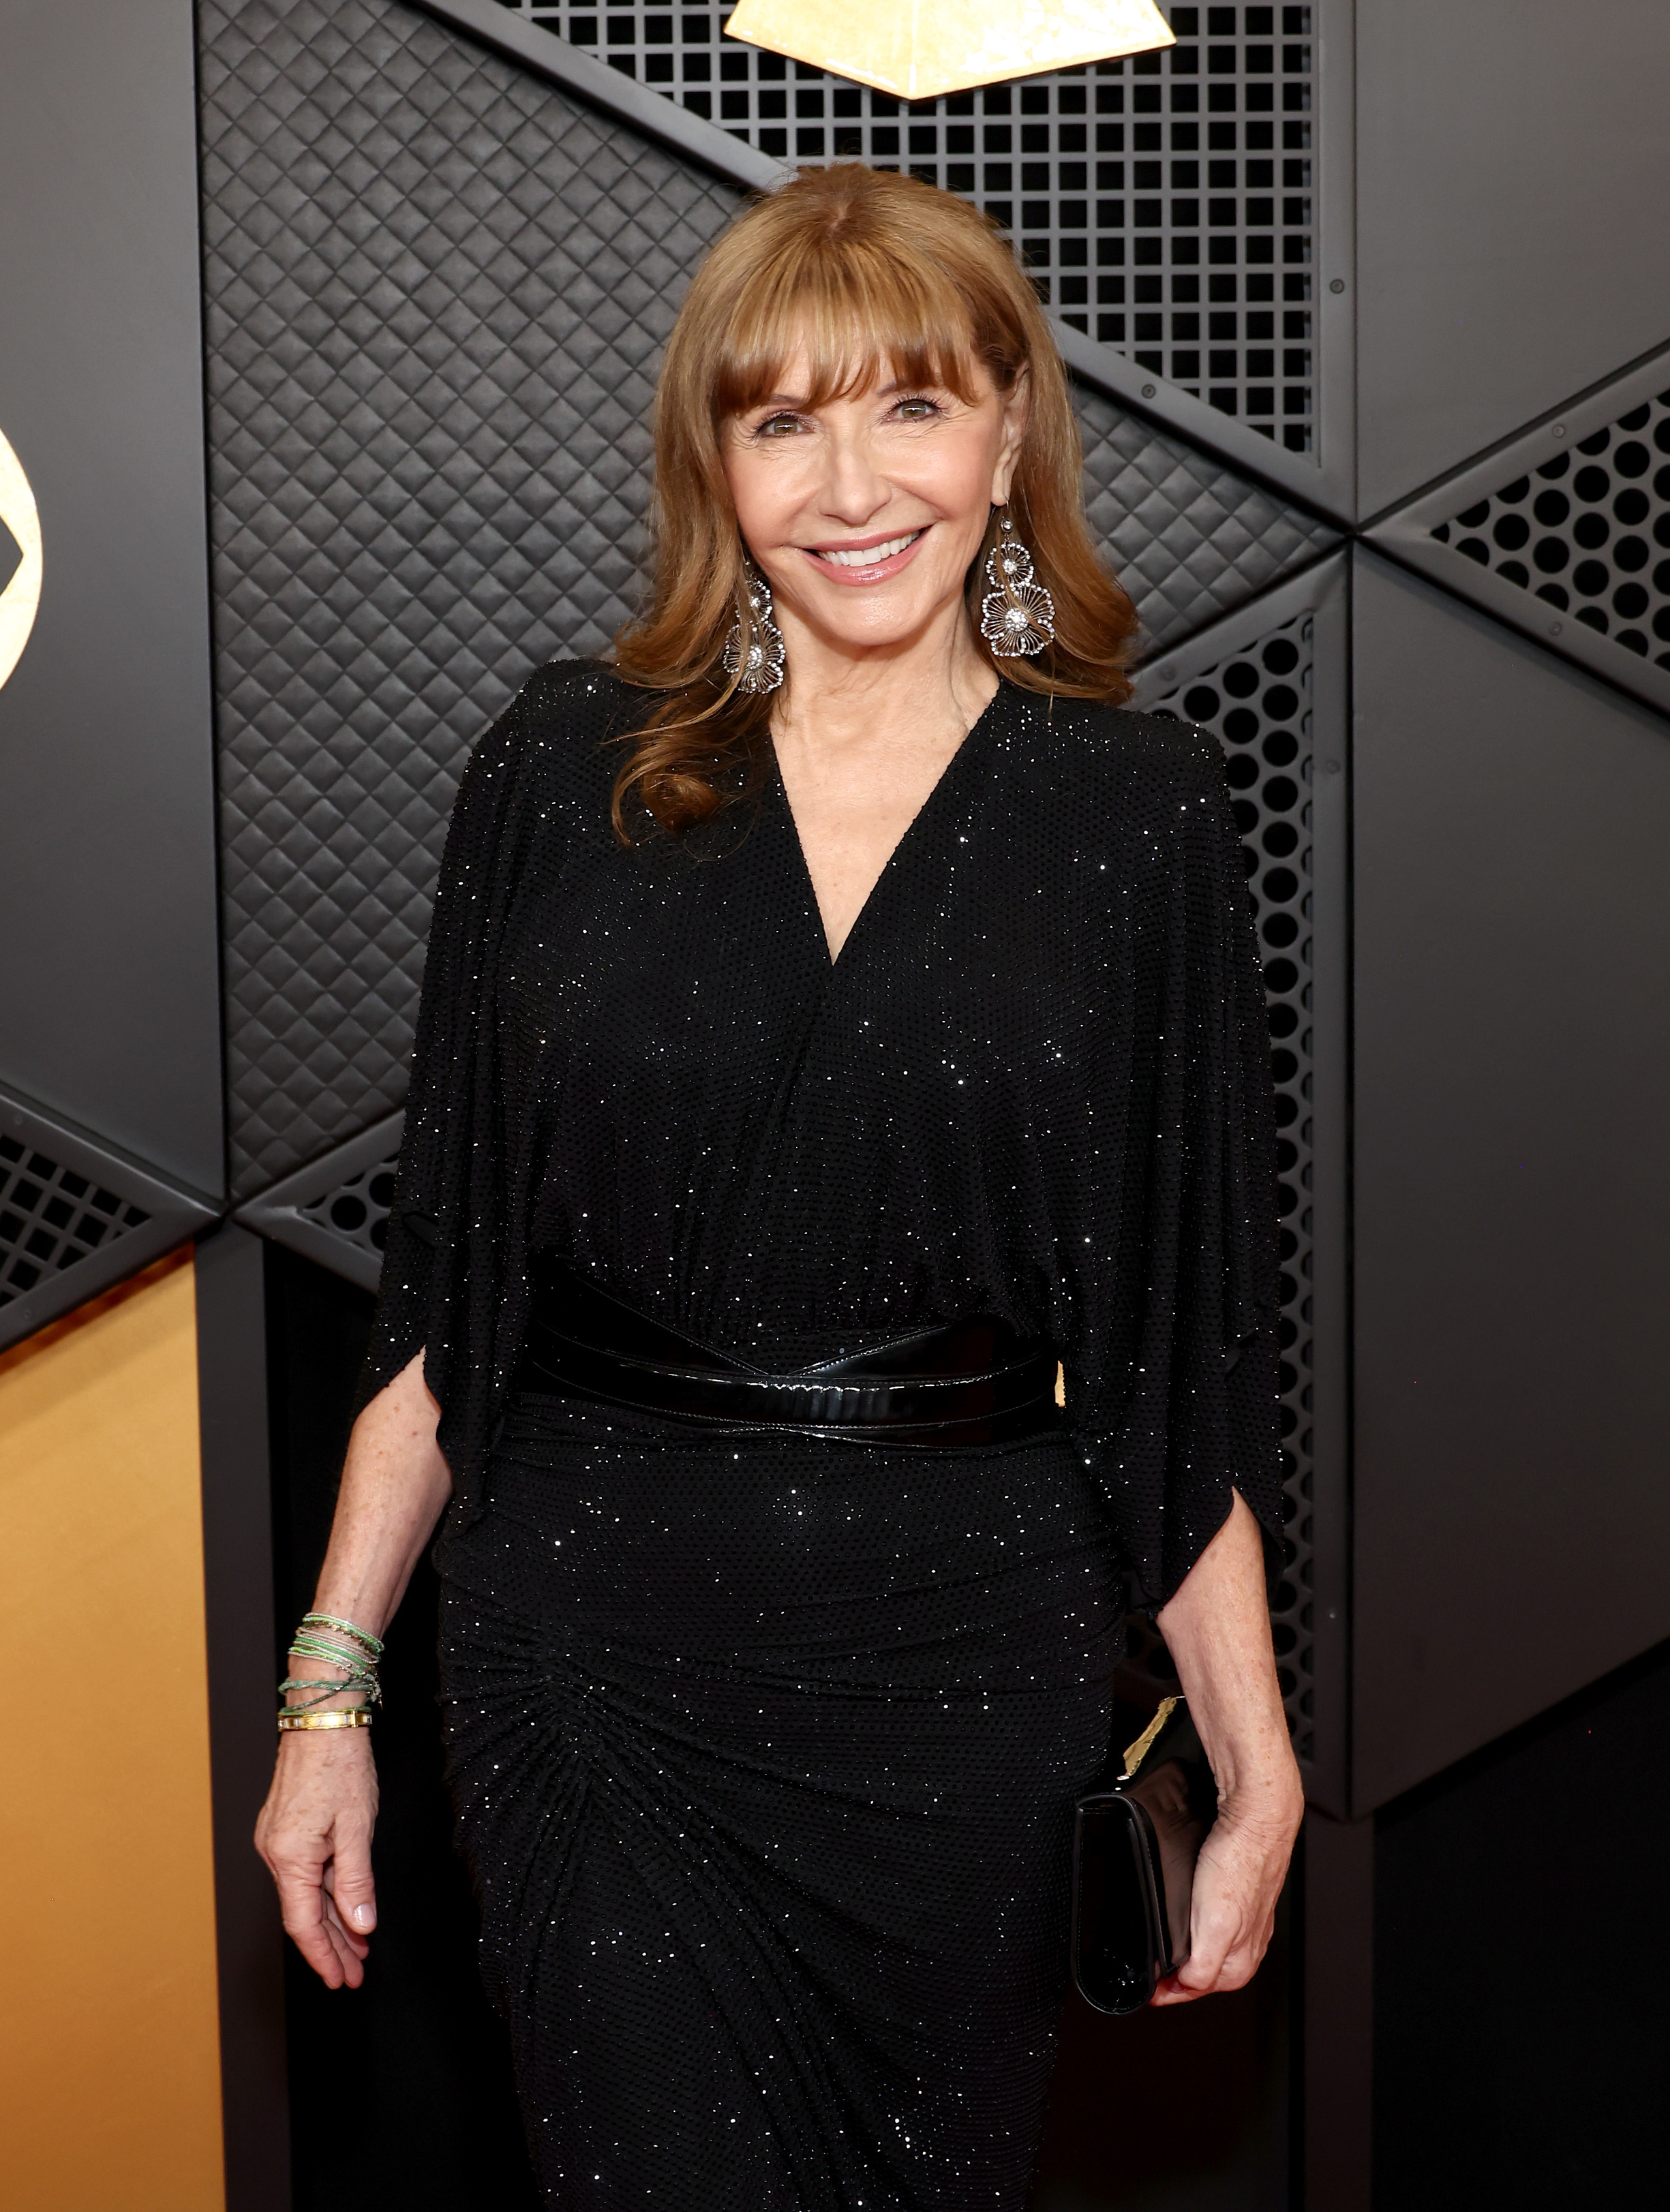 Elegant individual in a sparkling black wrap dress and dangling earrings, posing with a smile